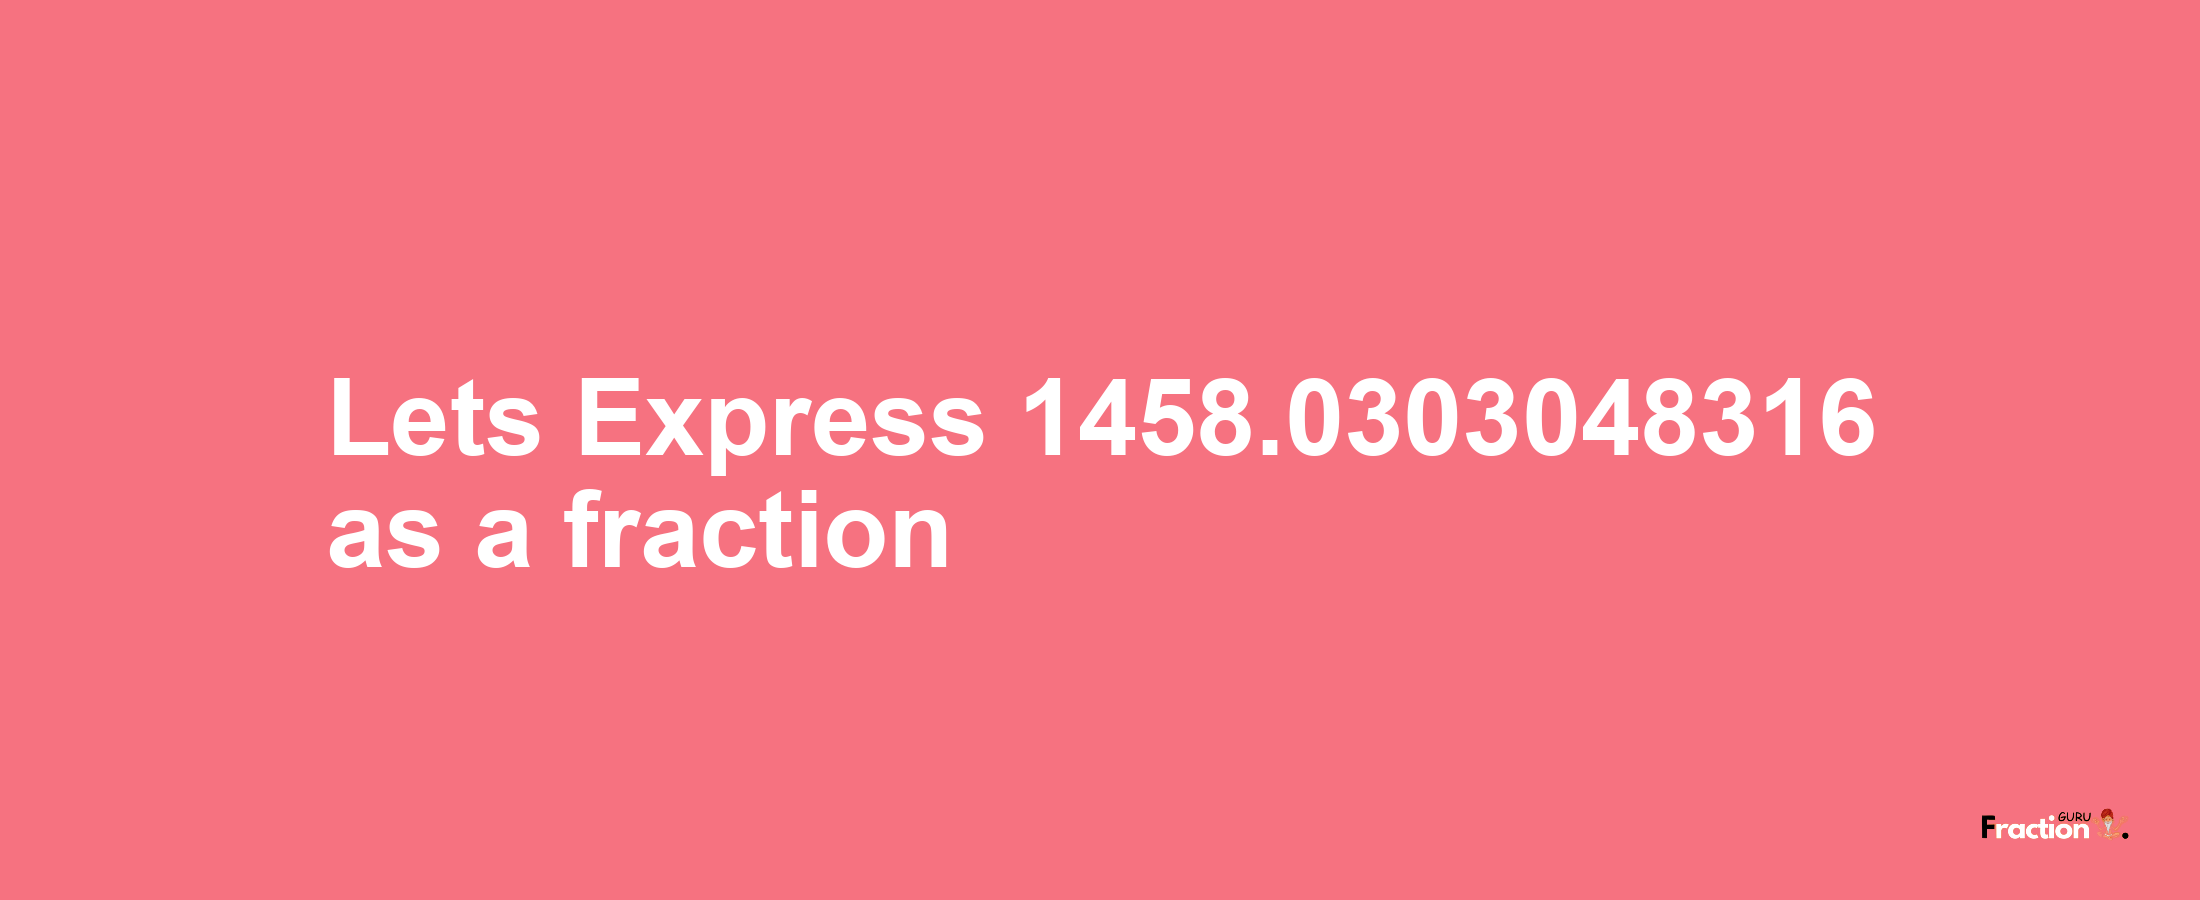 Lets Express 1458.0303048316 as afraction